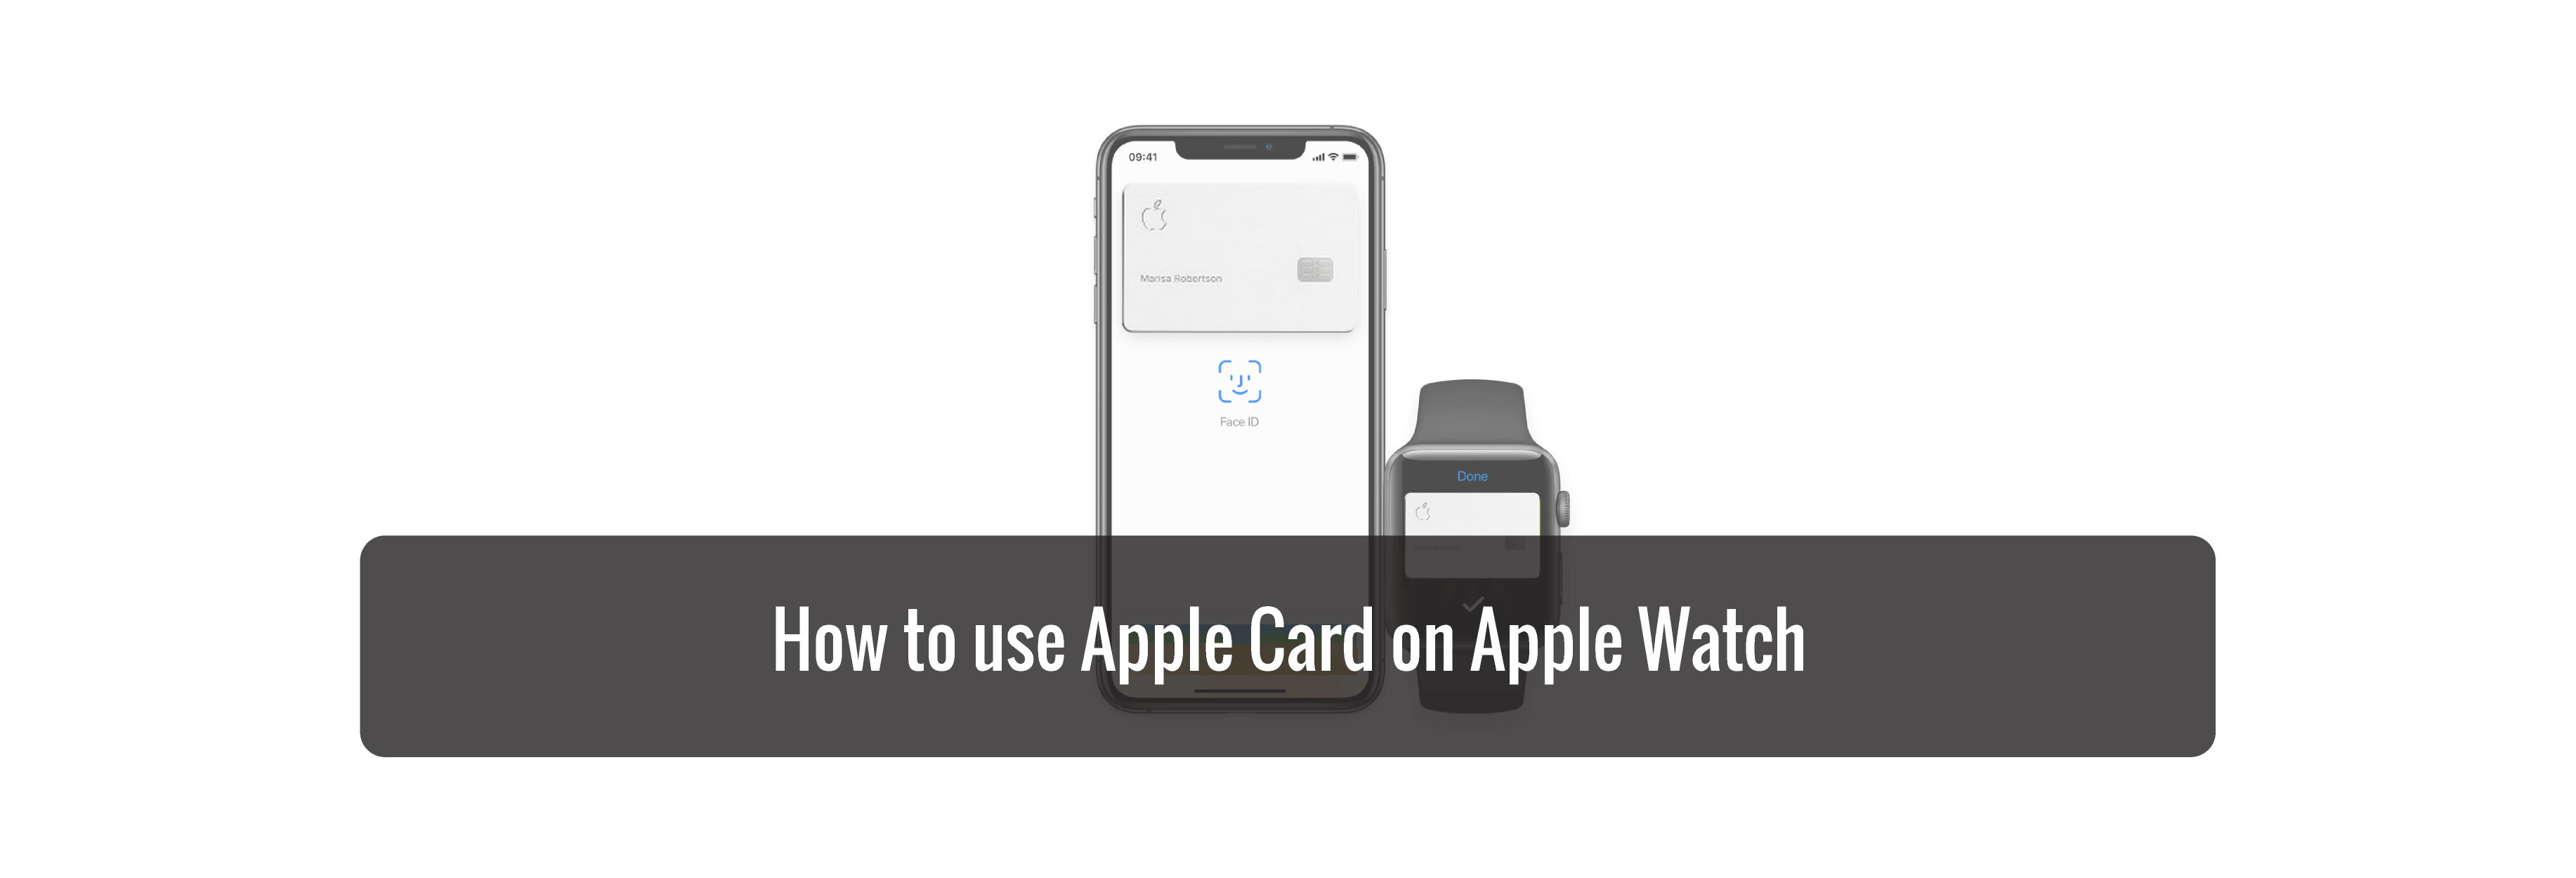 How to use Apple Card on Apple Watch